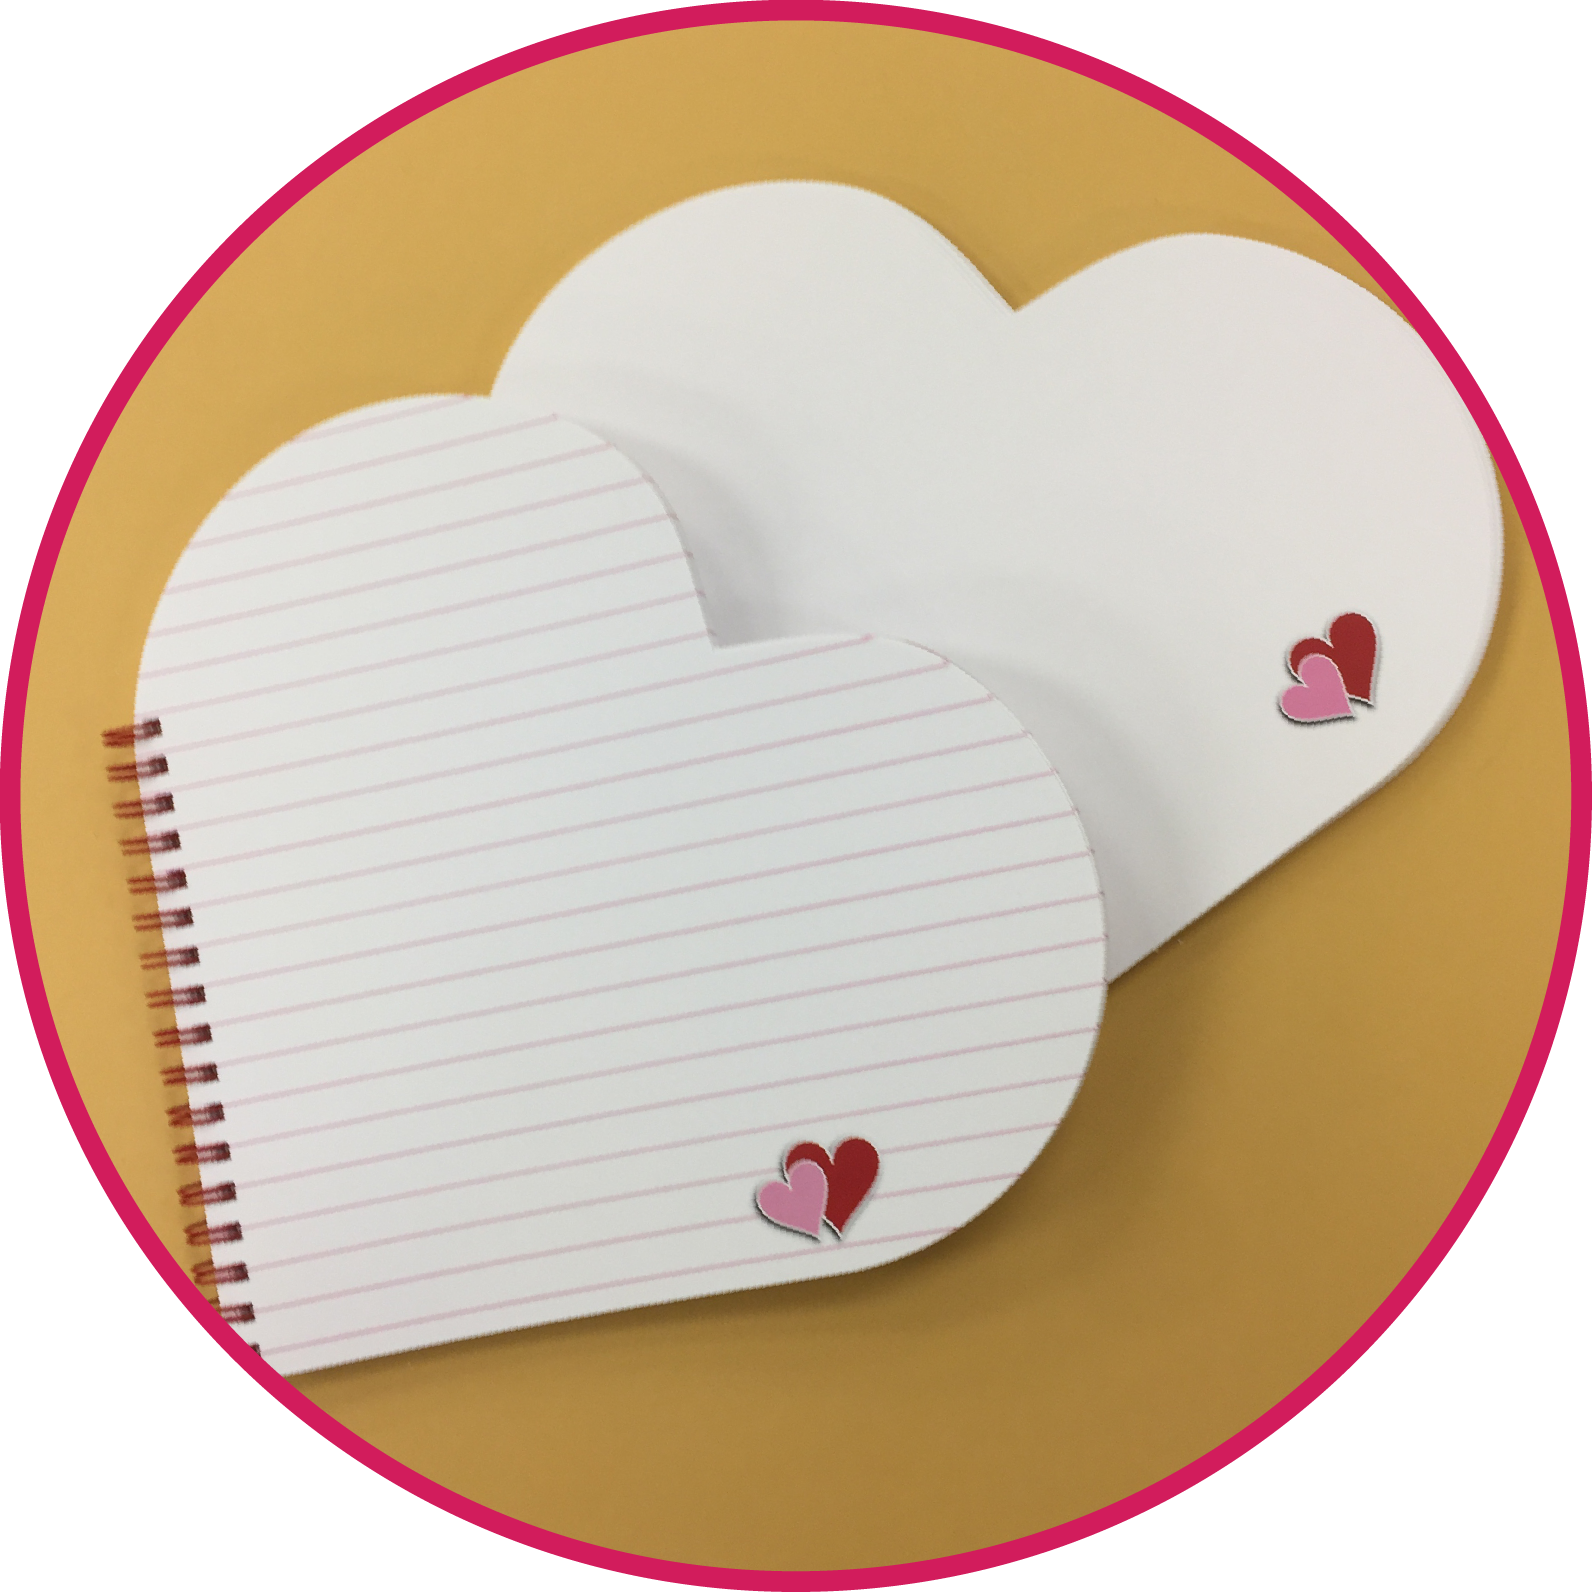 A Notebook With Hearts On It